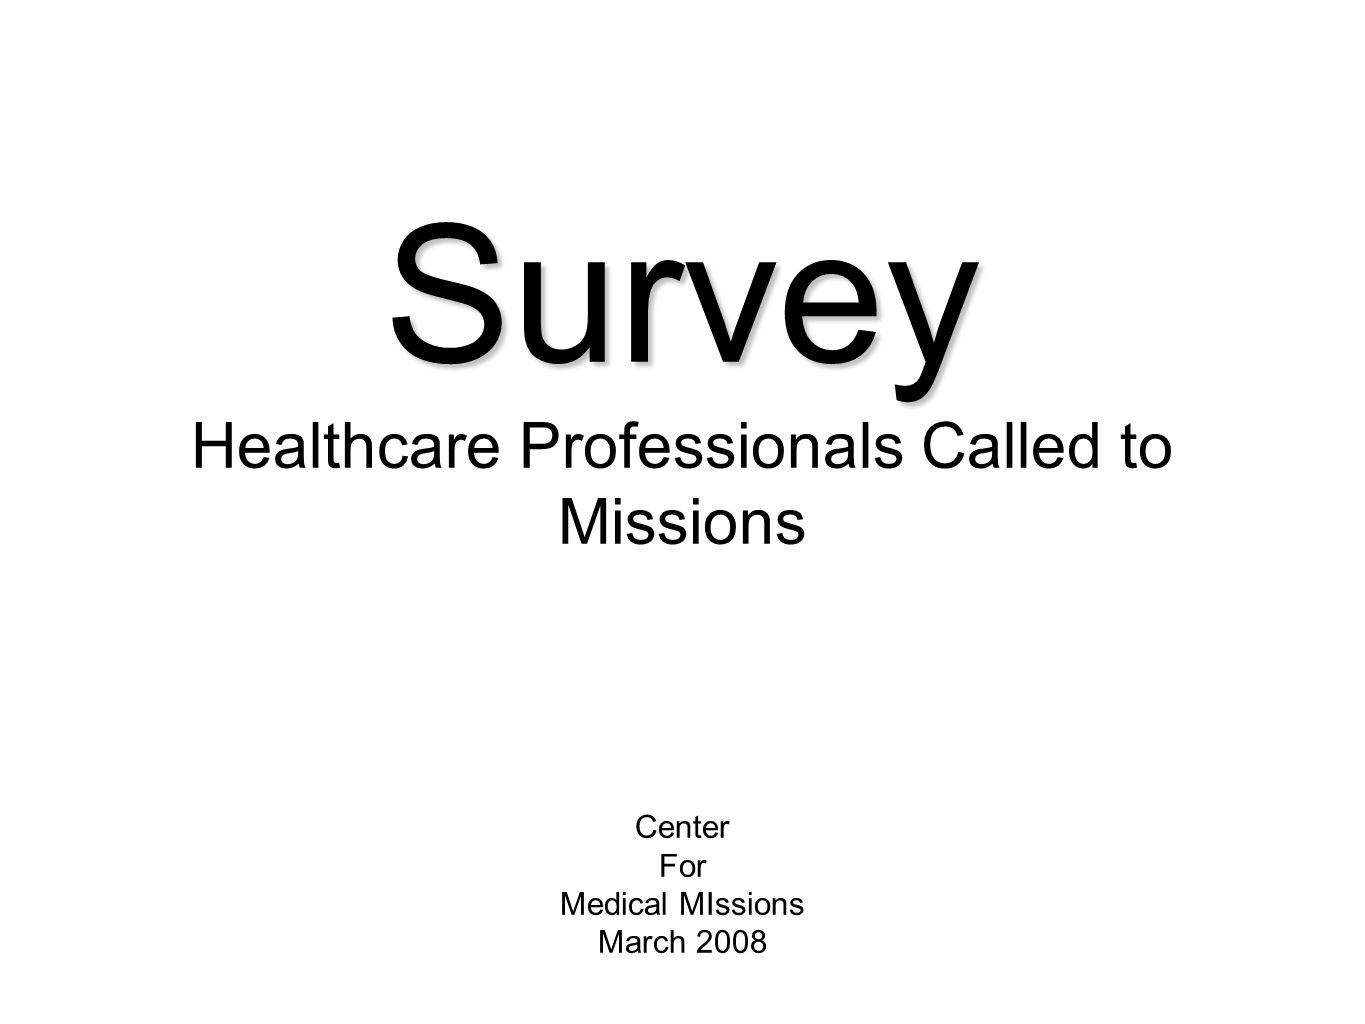 Survey Survey Healthcare Professionals Called to Missions Center For Medical MIssions March 2008